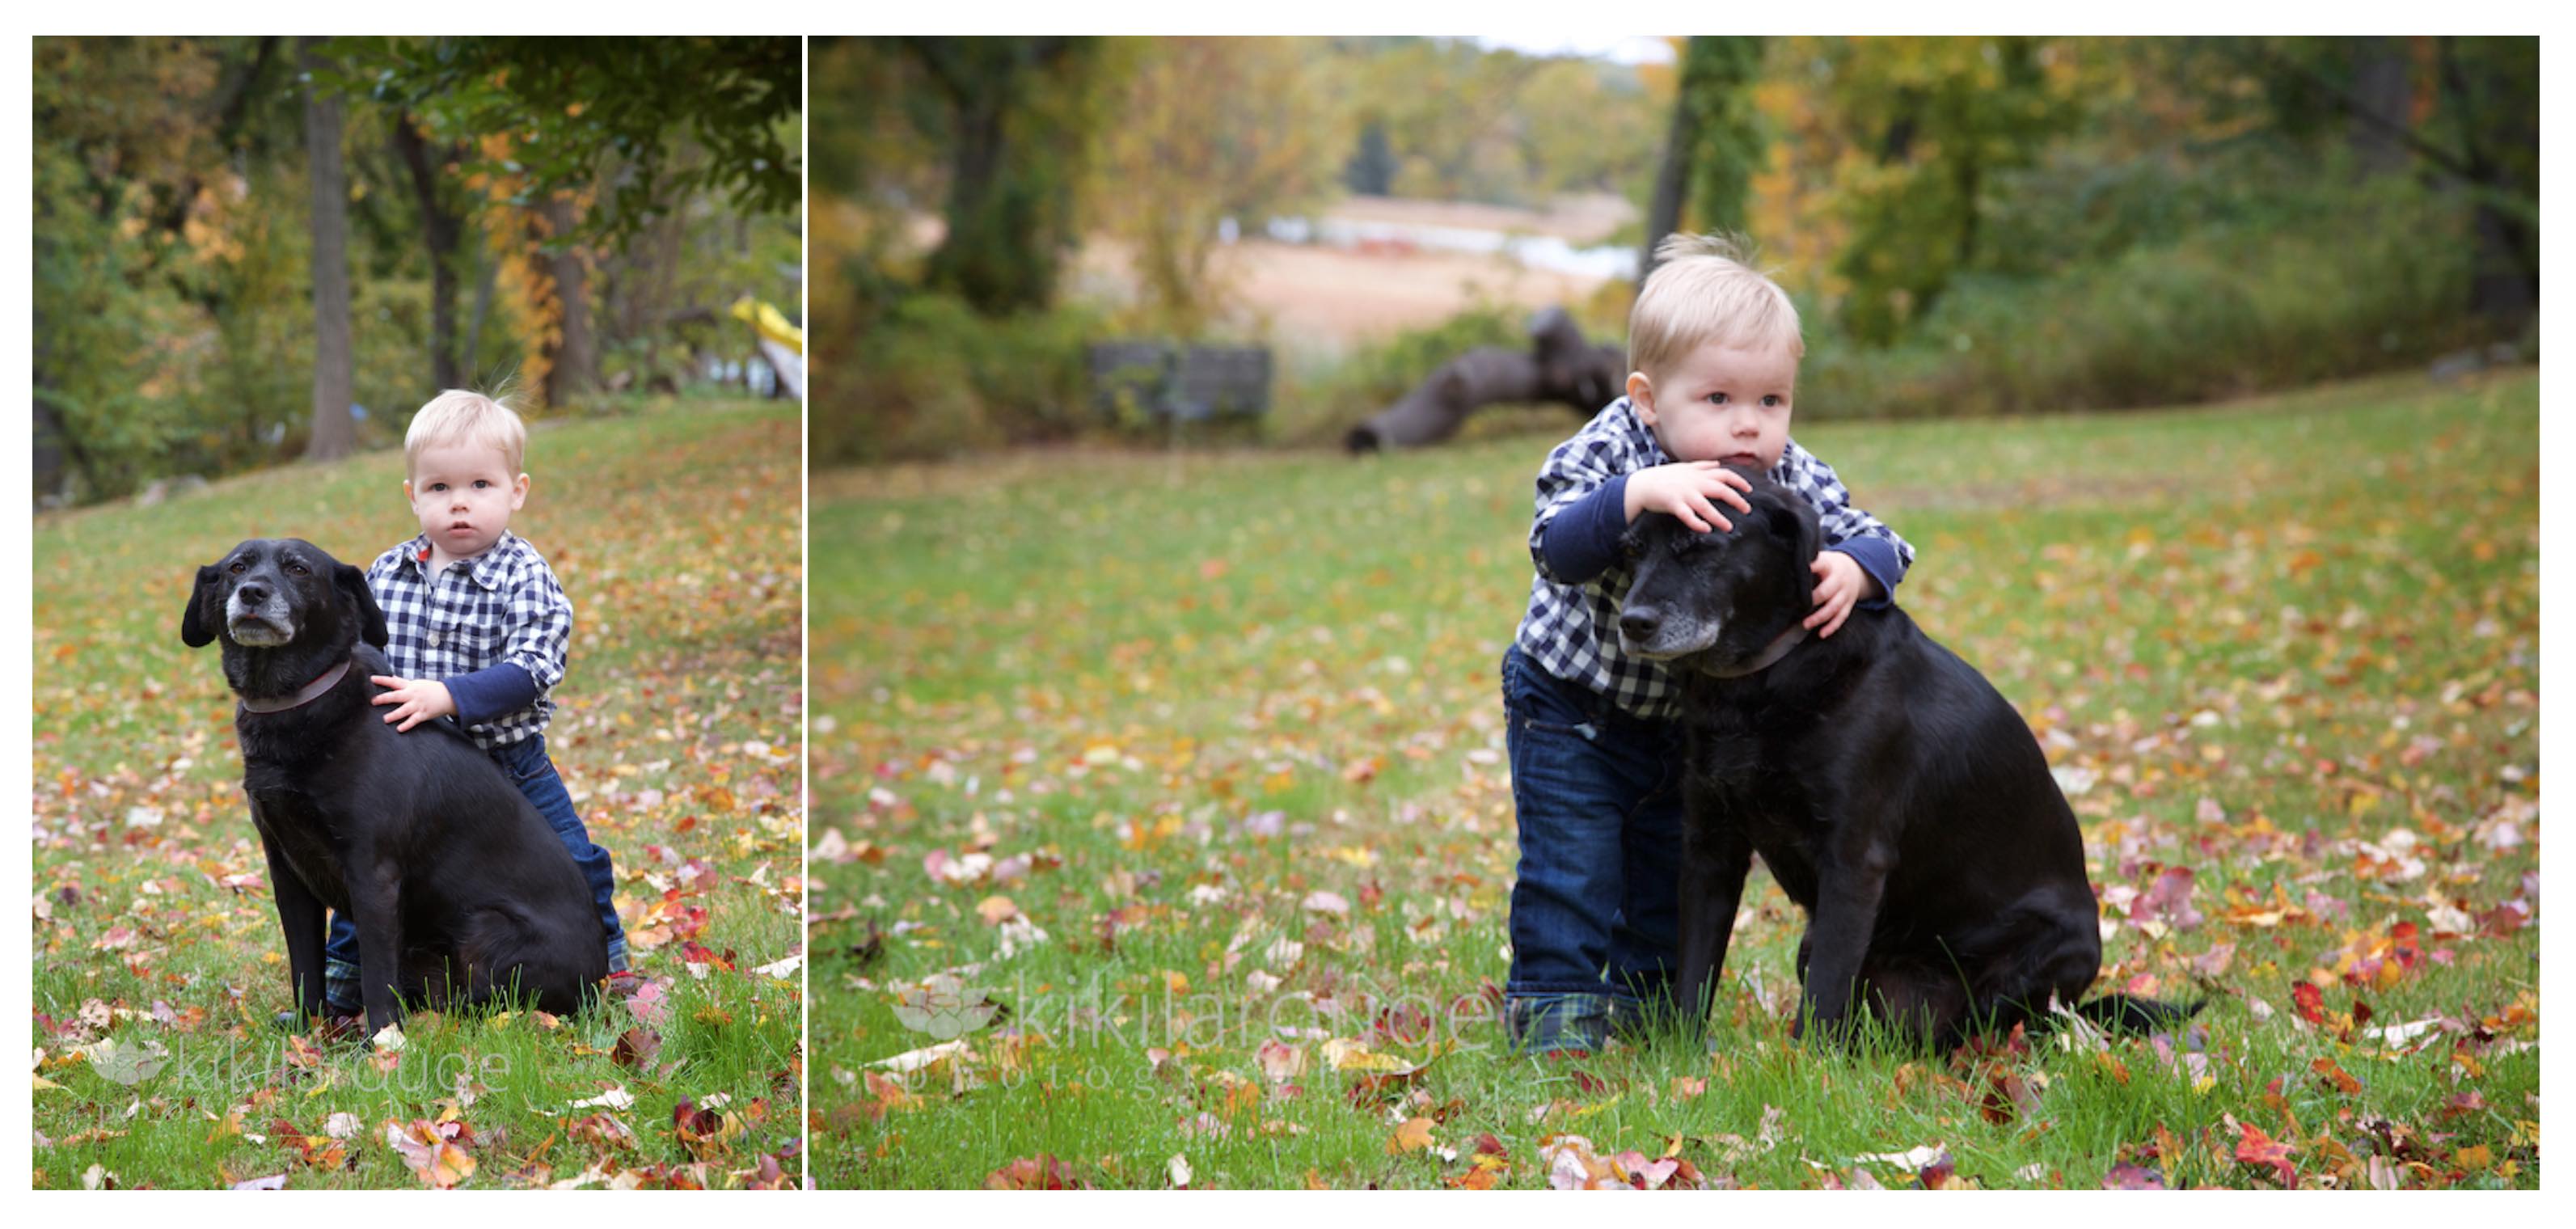 Little boy with his black dog